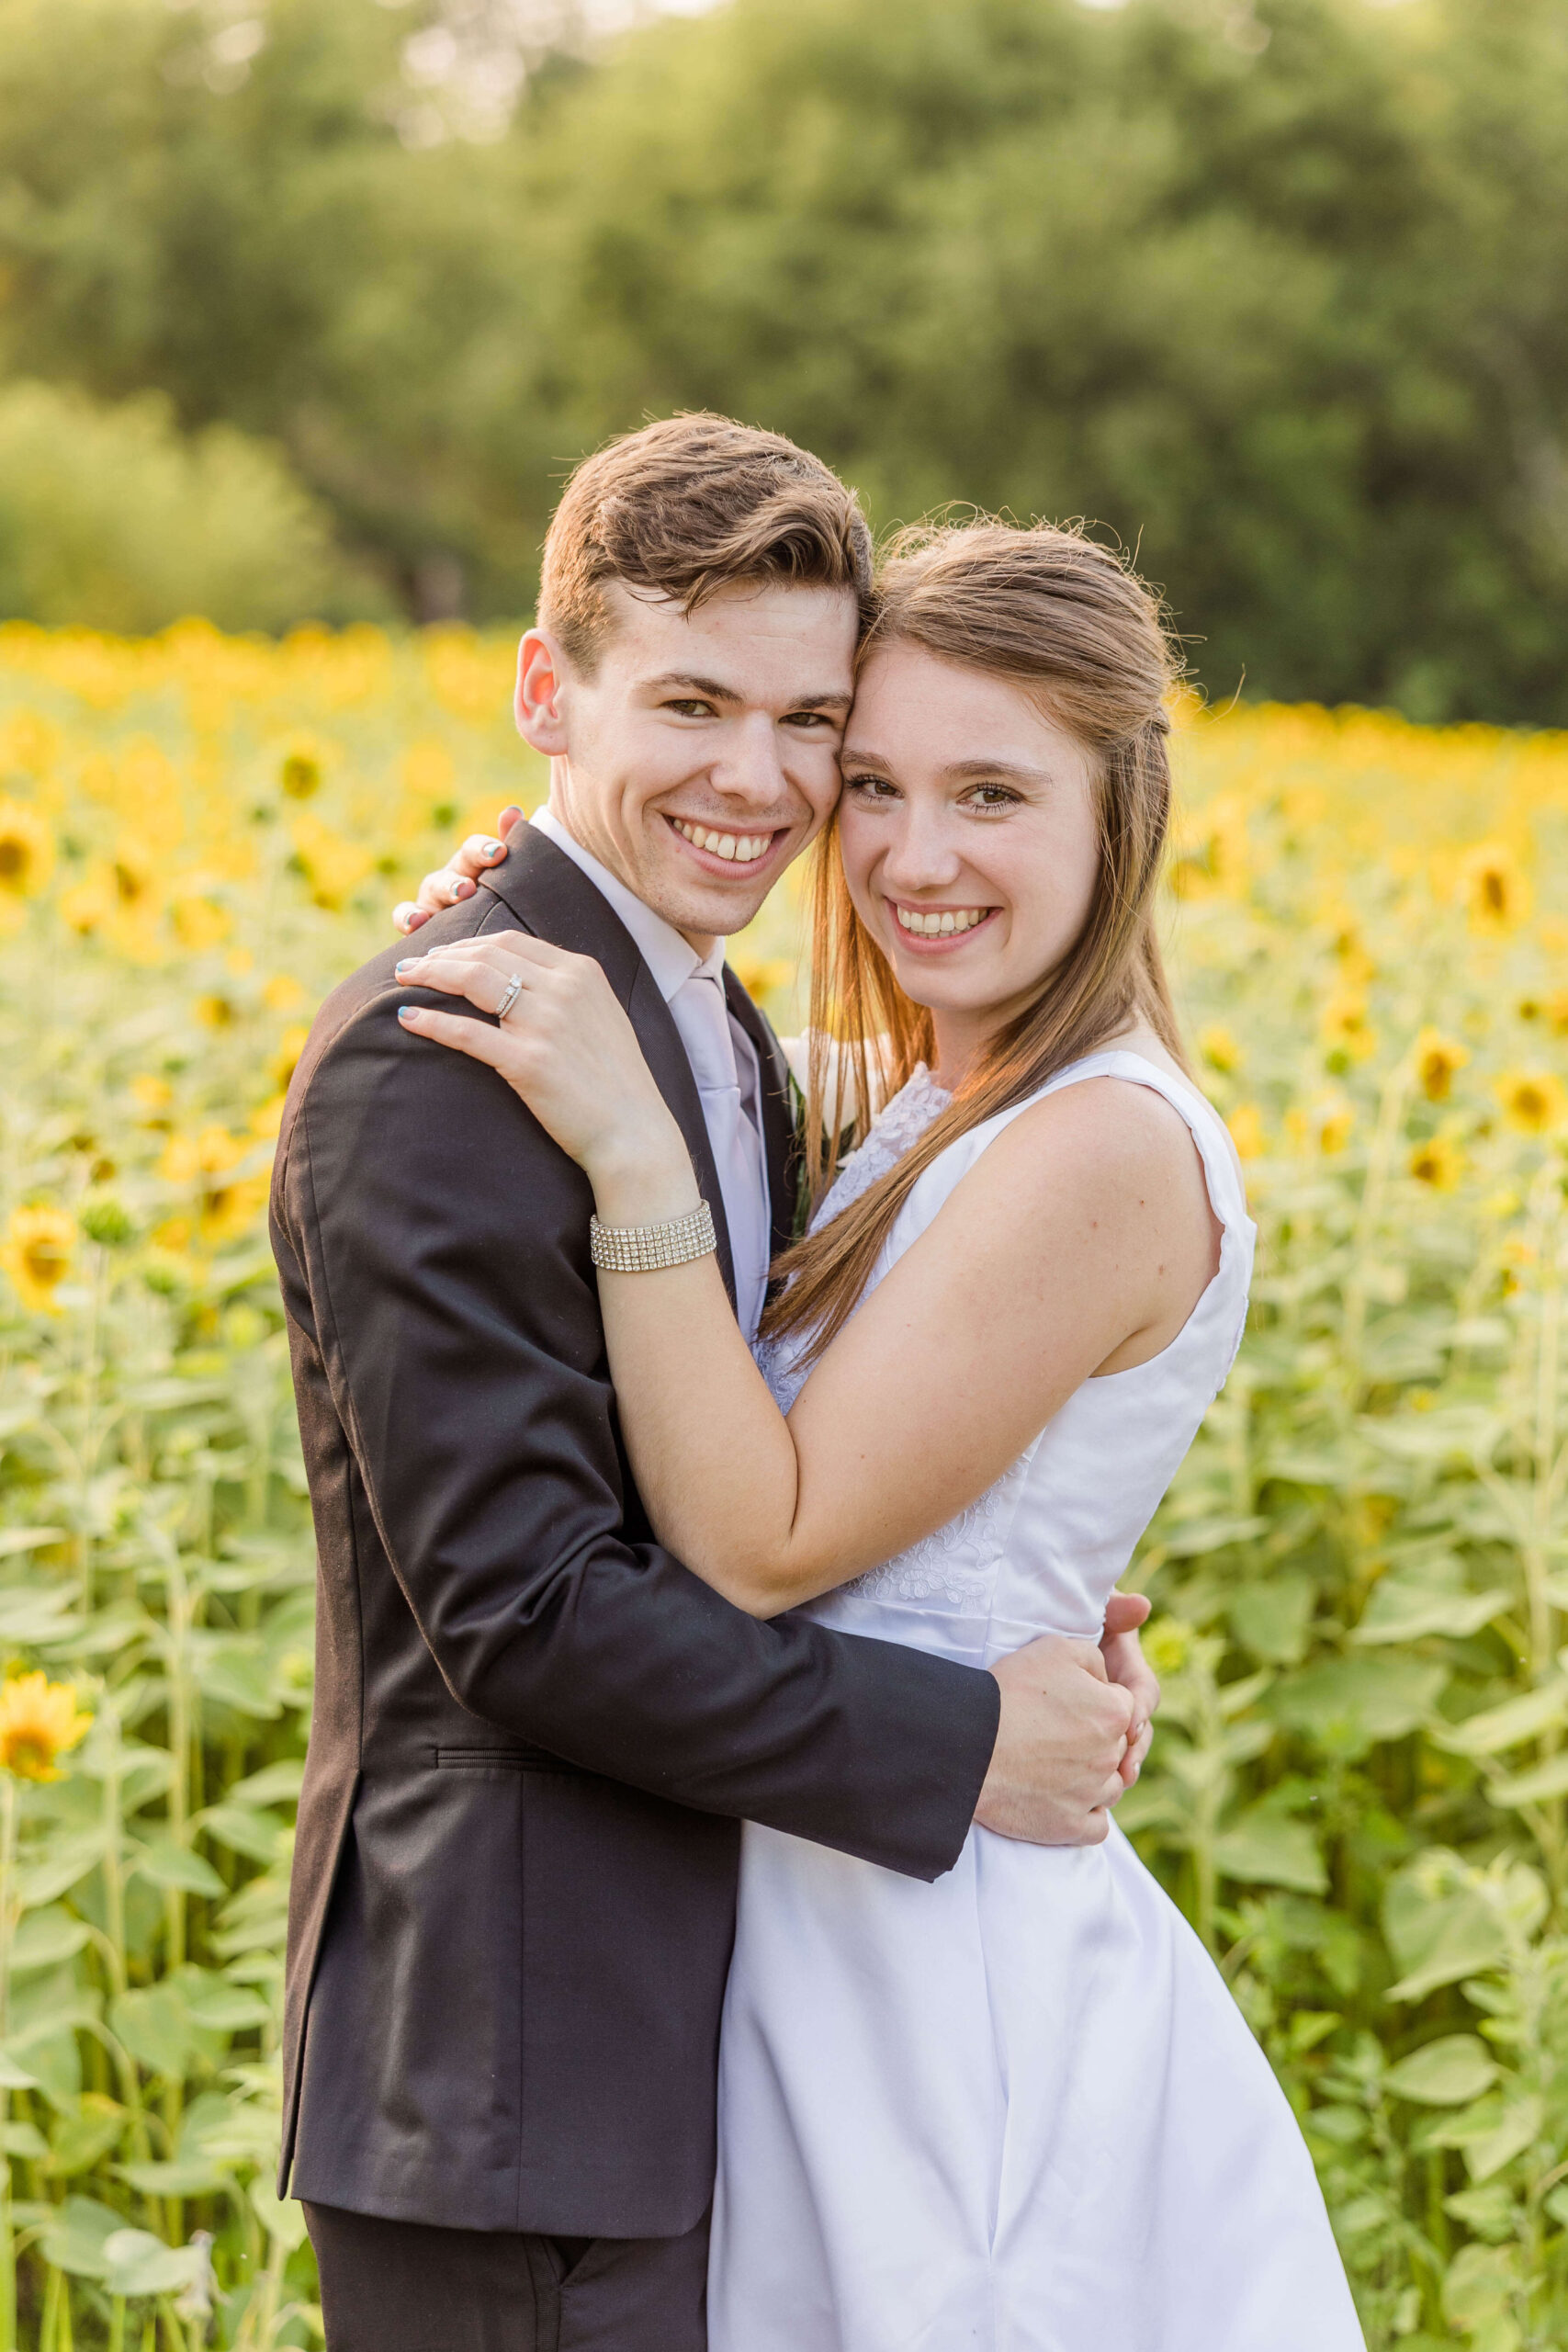 Bride and groom looking at camera during golden hour portraits in a sunflower field on their wedding day.